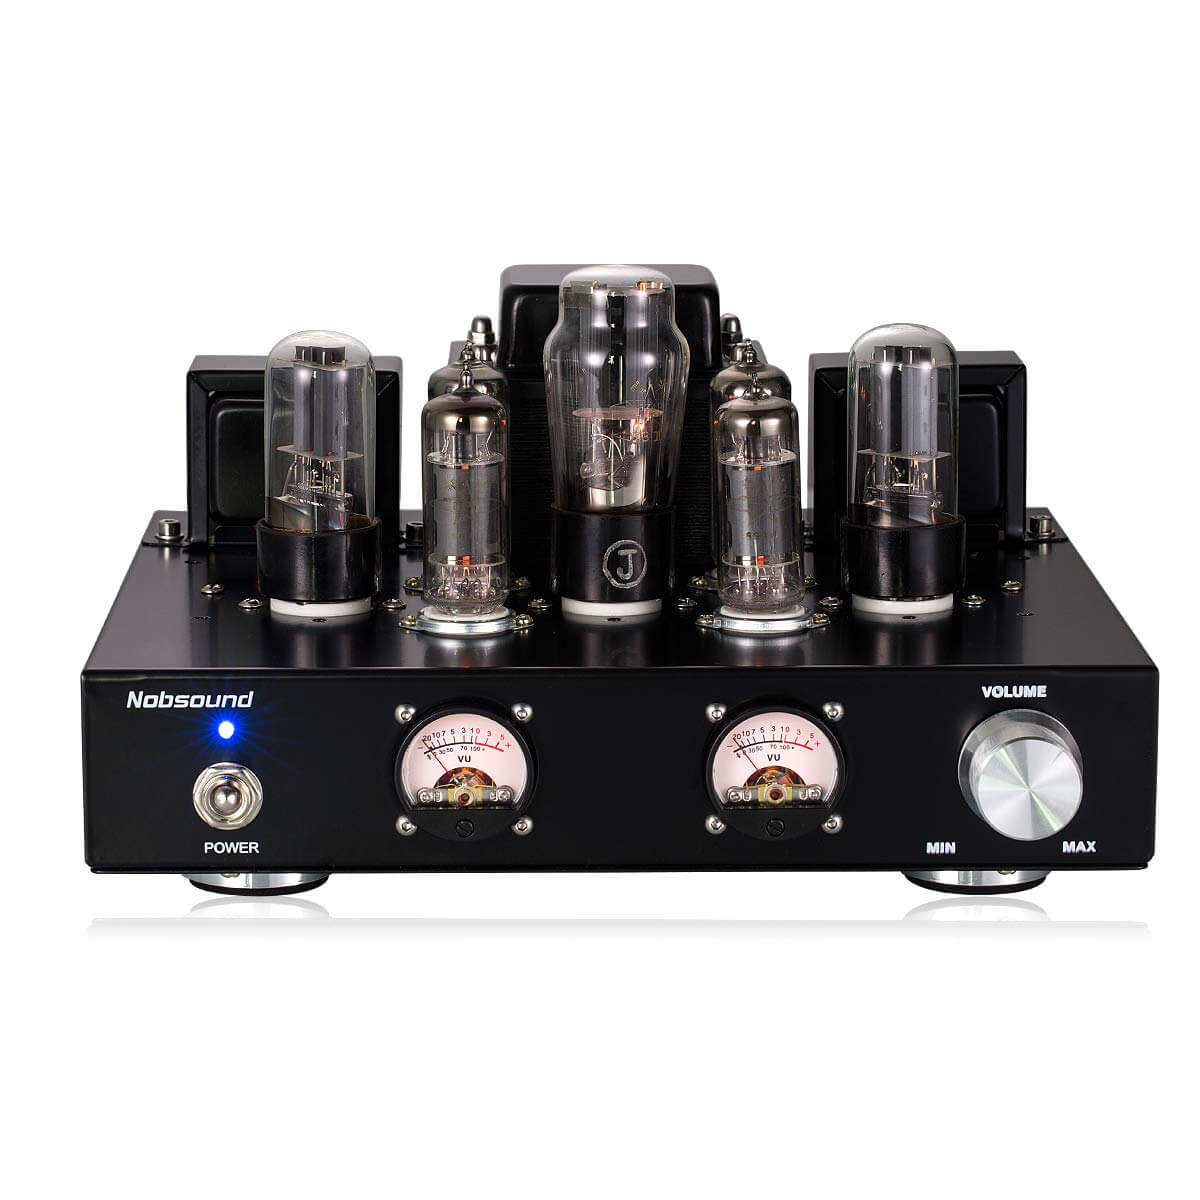 Nobsound 6P1 6.8W x 2 Vacuum Tube Power Amplifier; Stereo Class A Single-Ended Audio Amp Handcrafted